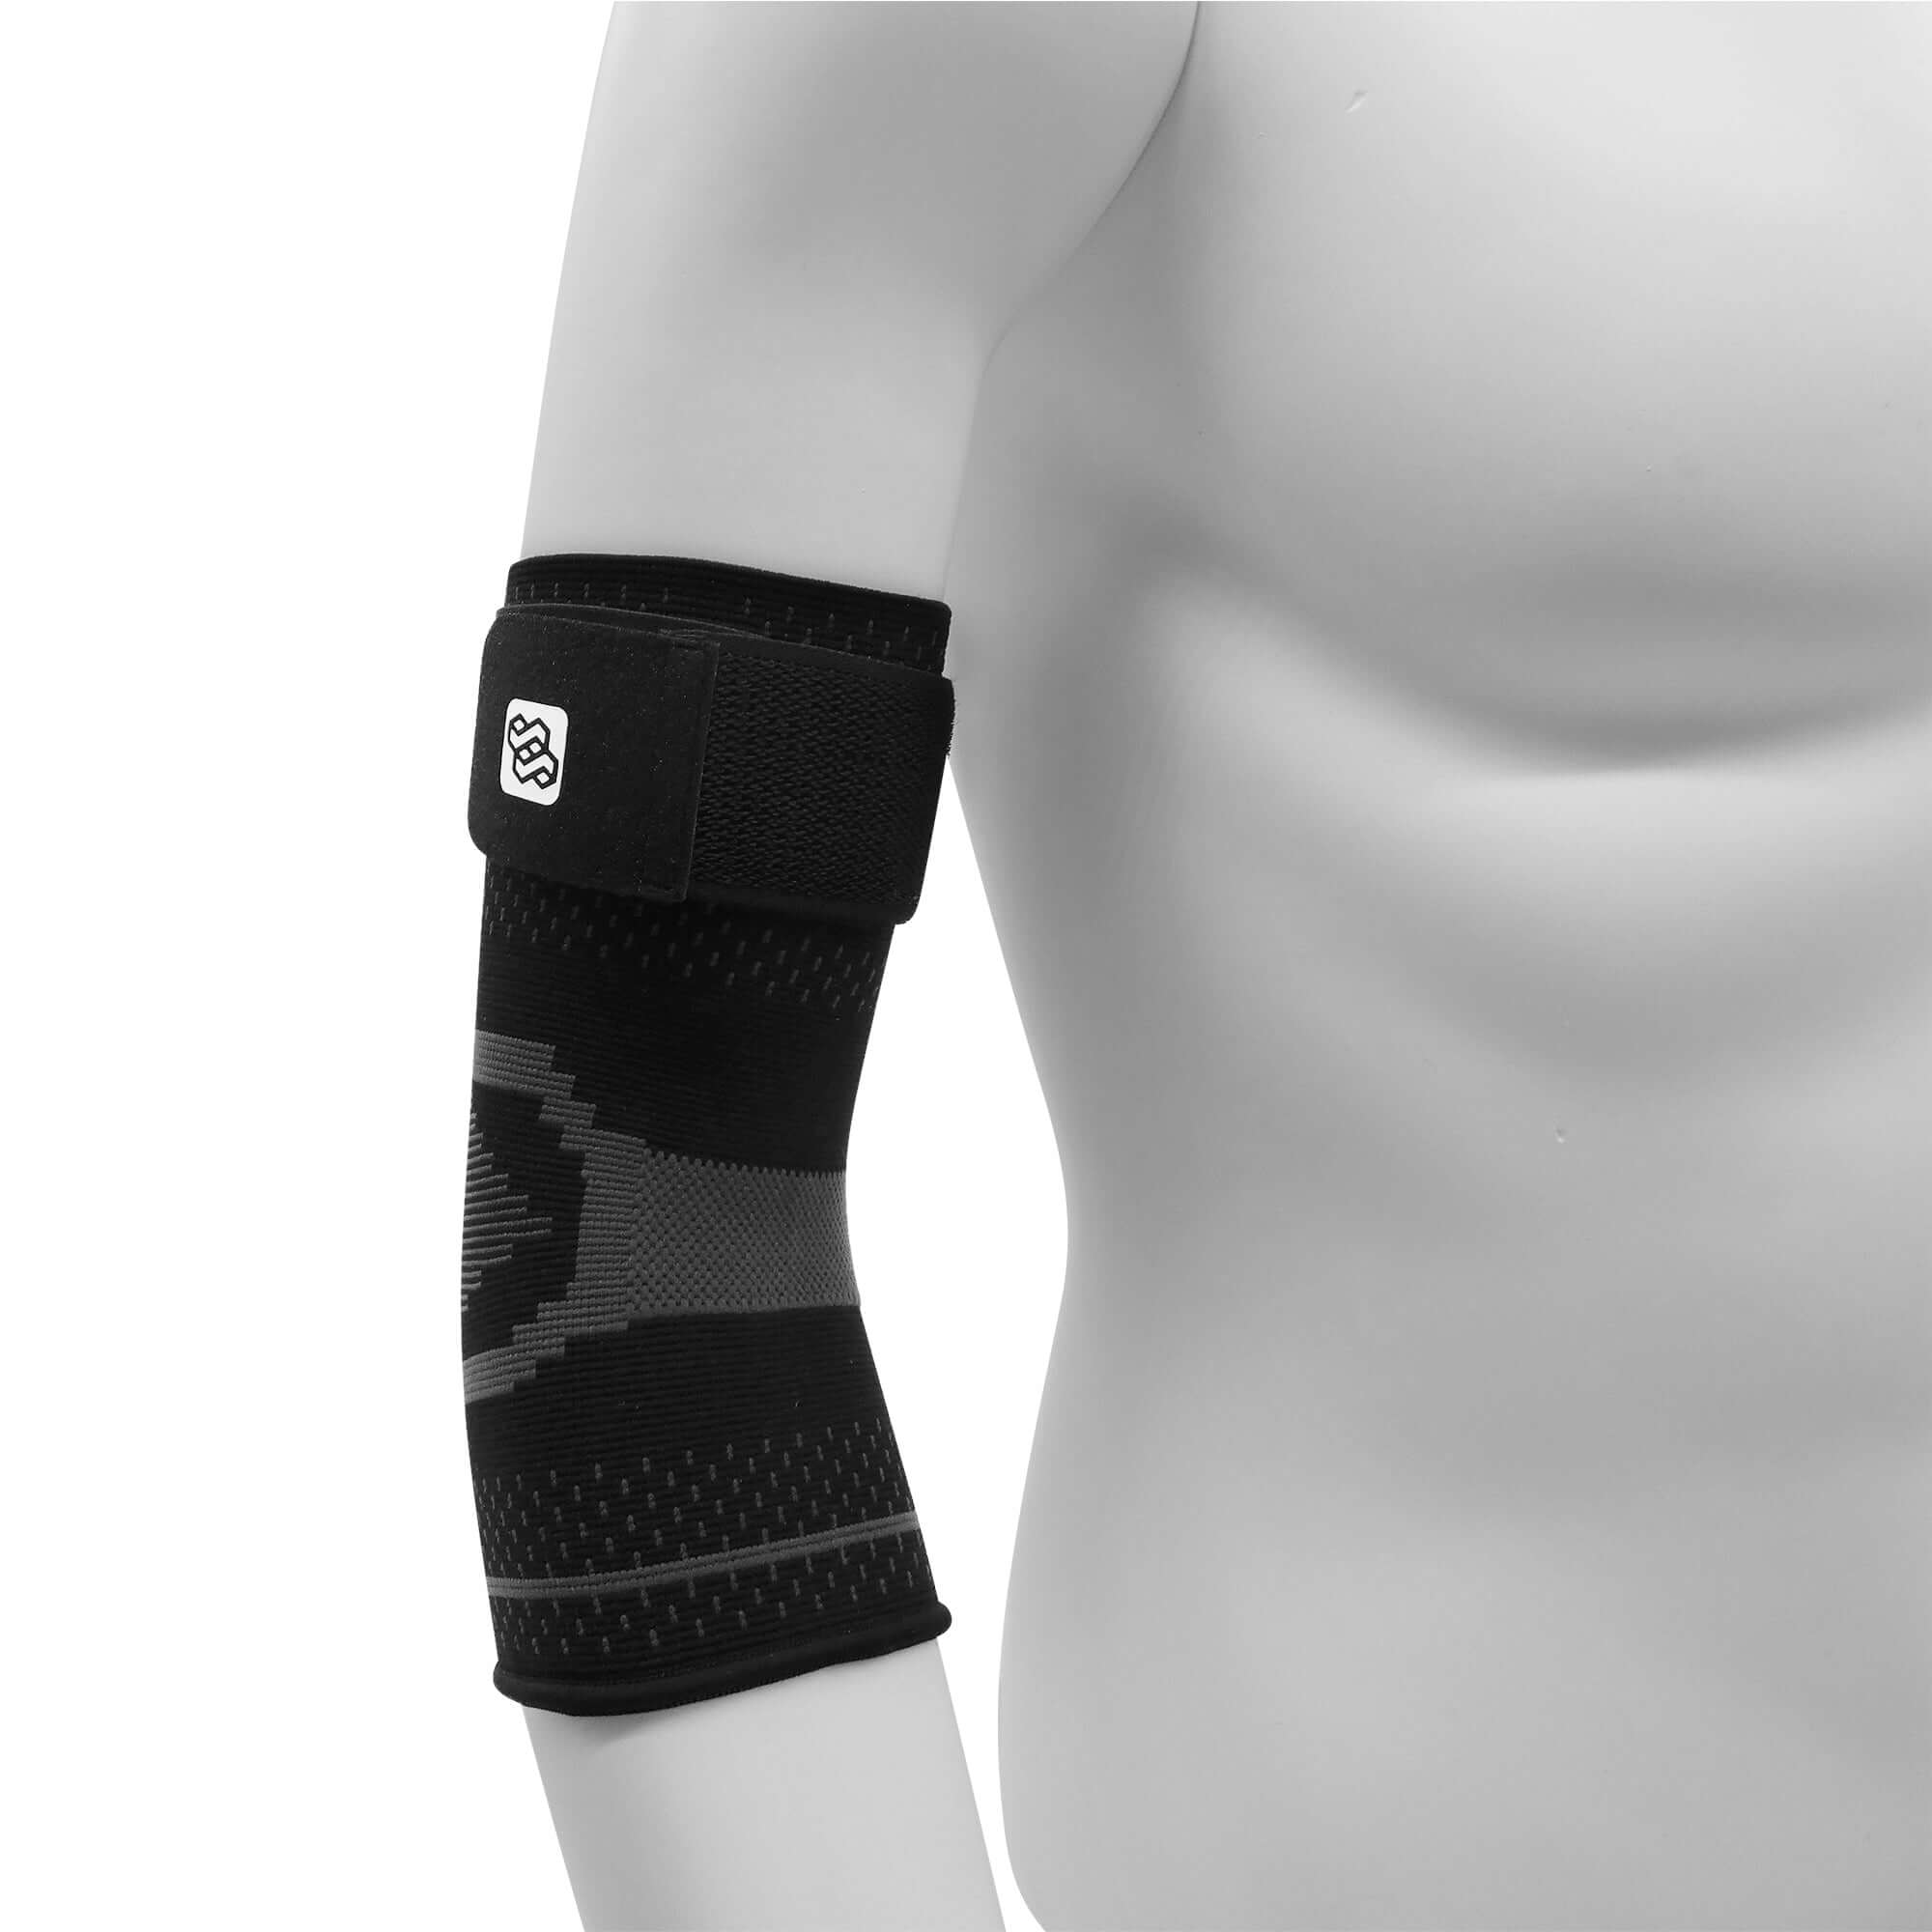 Elbow Compression Brace Support with strap - KEFLUK